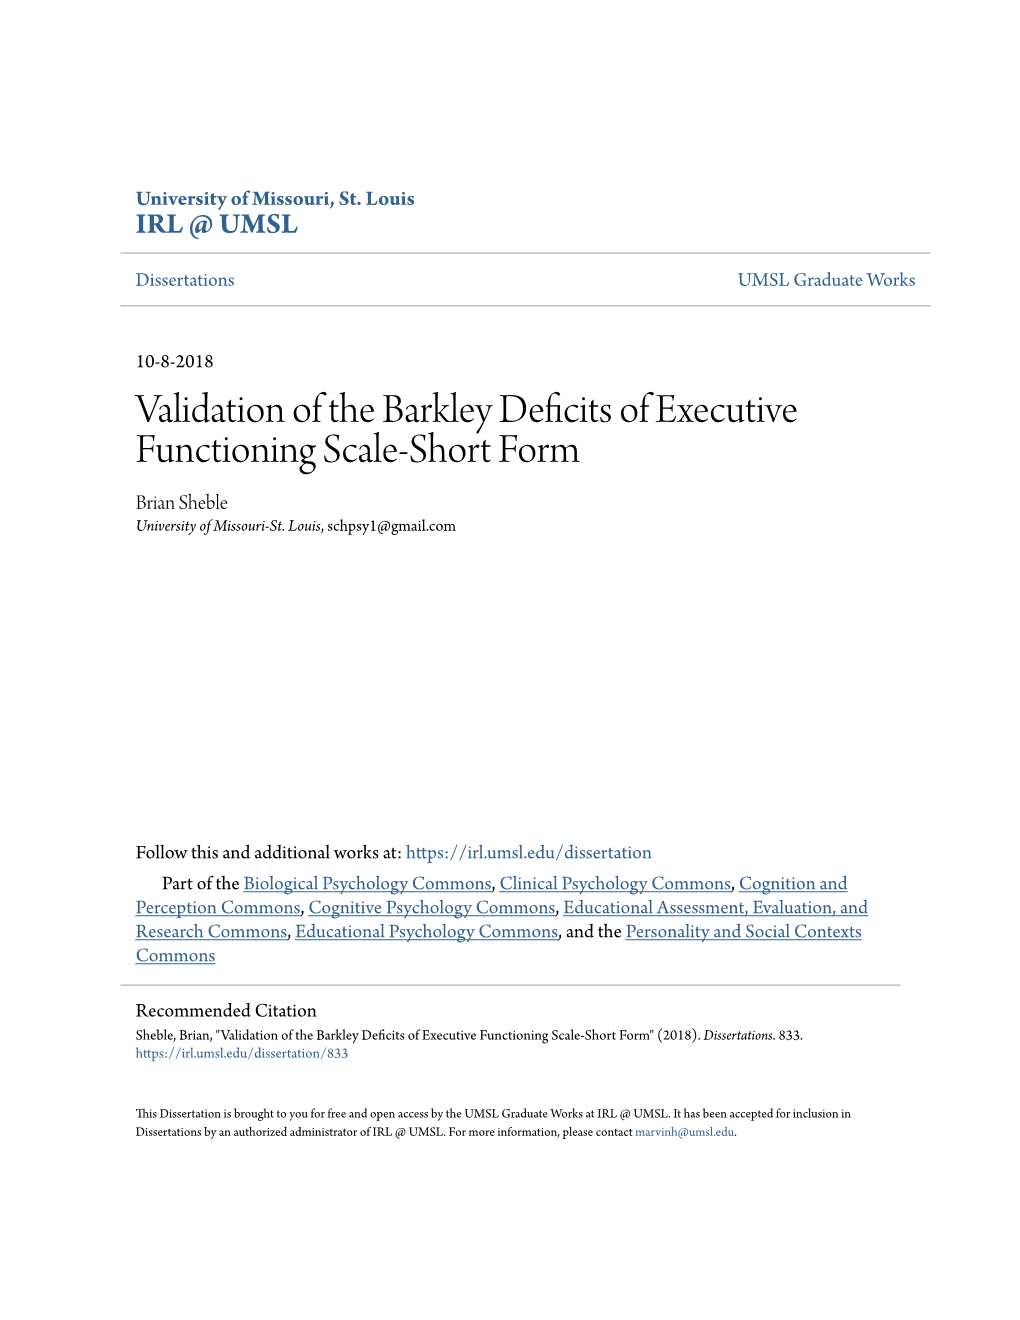 Validation of the Barkley Deficits of Executive Functioning Scale-Short Form Brian Sheble University of Missouri-St